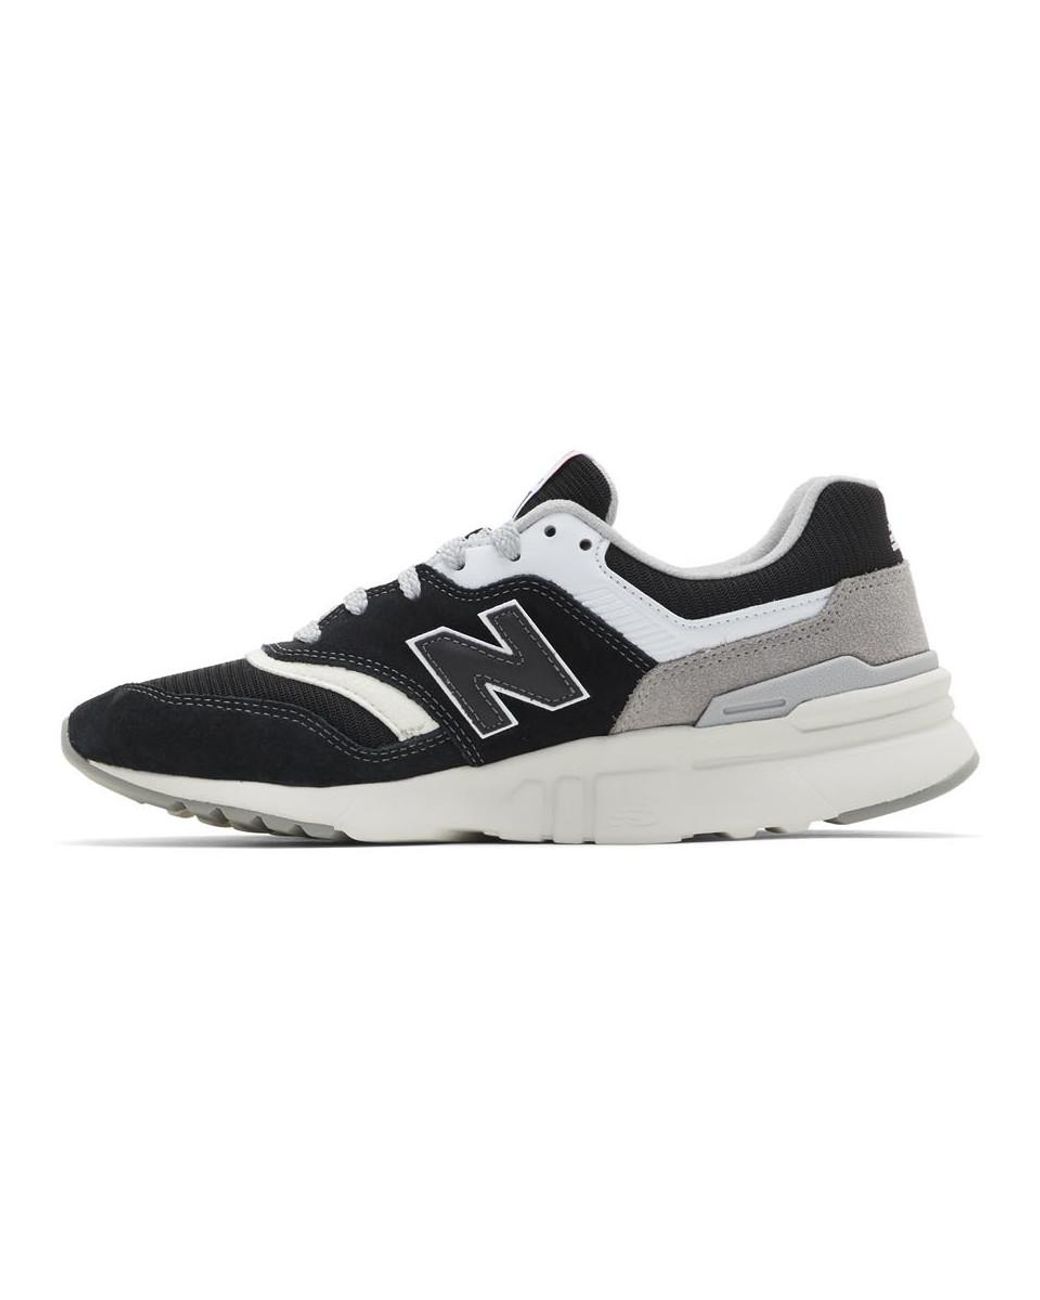 New Balance Black And Grey 997h Sneakers for Men | Lyst